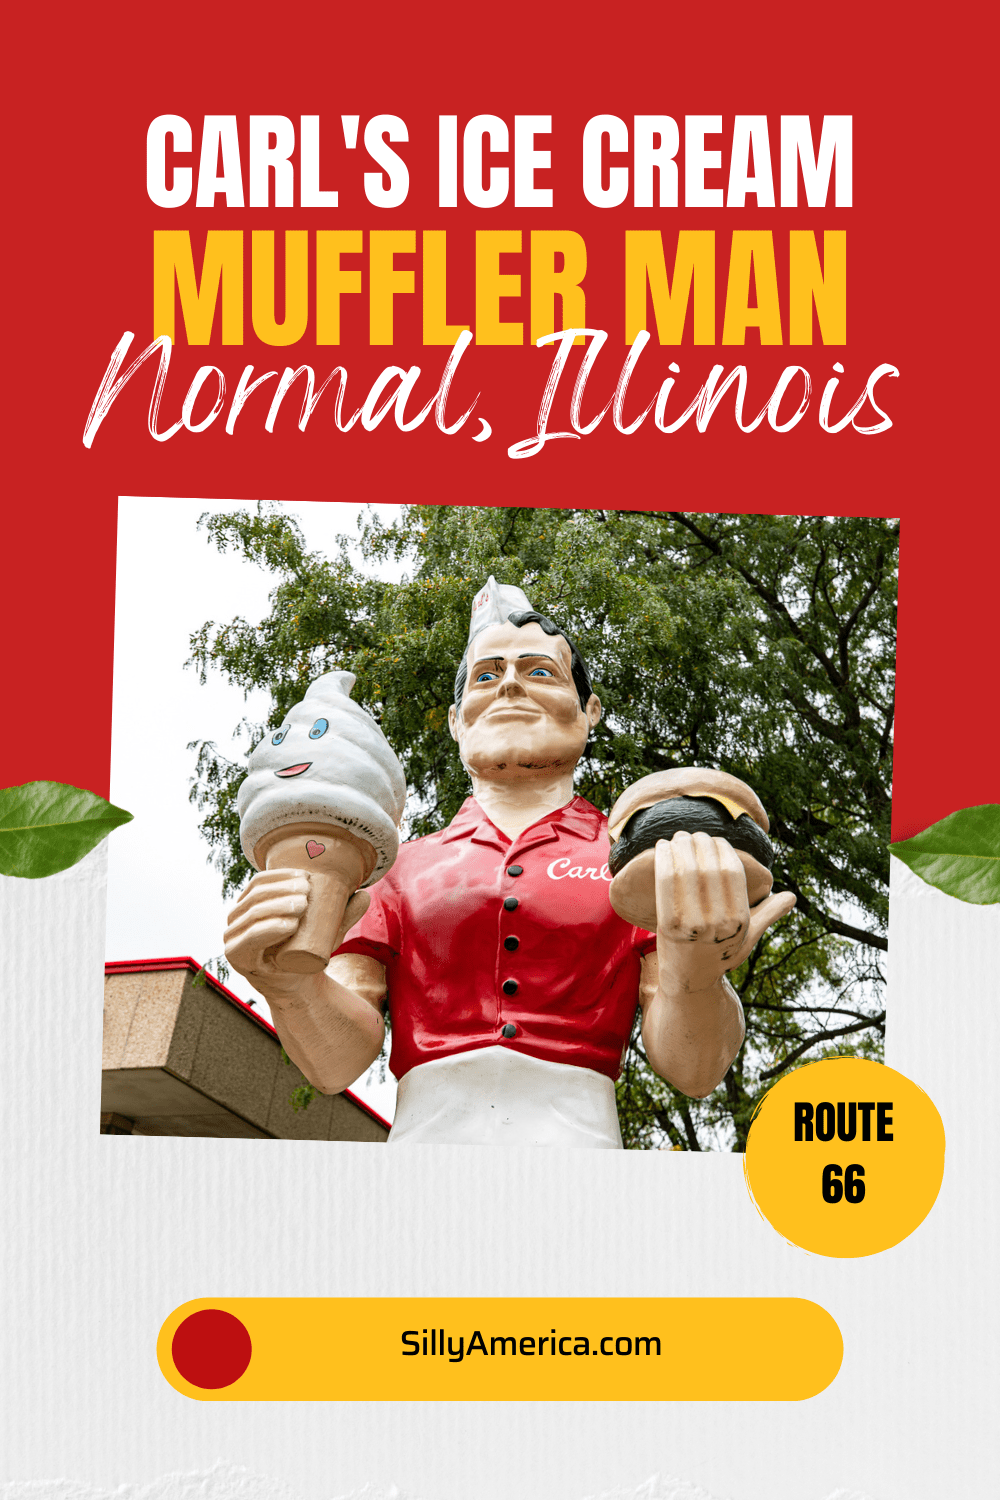 The Carl’s Ice Cream Muffler Man in Normal, Illinois, is a 15-foot tall version of the classic muffler man roadside attraction made by International Fiberglass. This wasn’t made by International Fiberglass. It was made by Virginia fiberglass artist Mark Cline, of Enchanted Castle Studios.   #RoadTrips #RoadTripStop #Route66 #Route66RoadTrip #OklahomaRoute66 #Oklahoma #OklahomaRoadTrip #OklahomaRoadsideAttractions #RoadsideAttractions #RoadsideAttraction #RoadsideAmerica #RoadTrip #MufflerMan